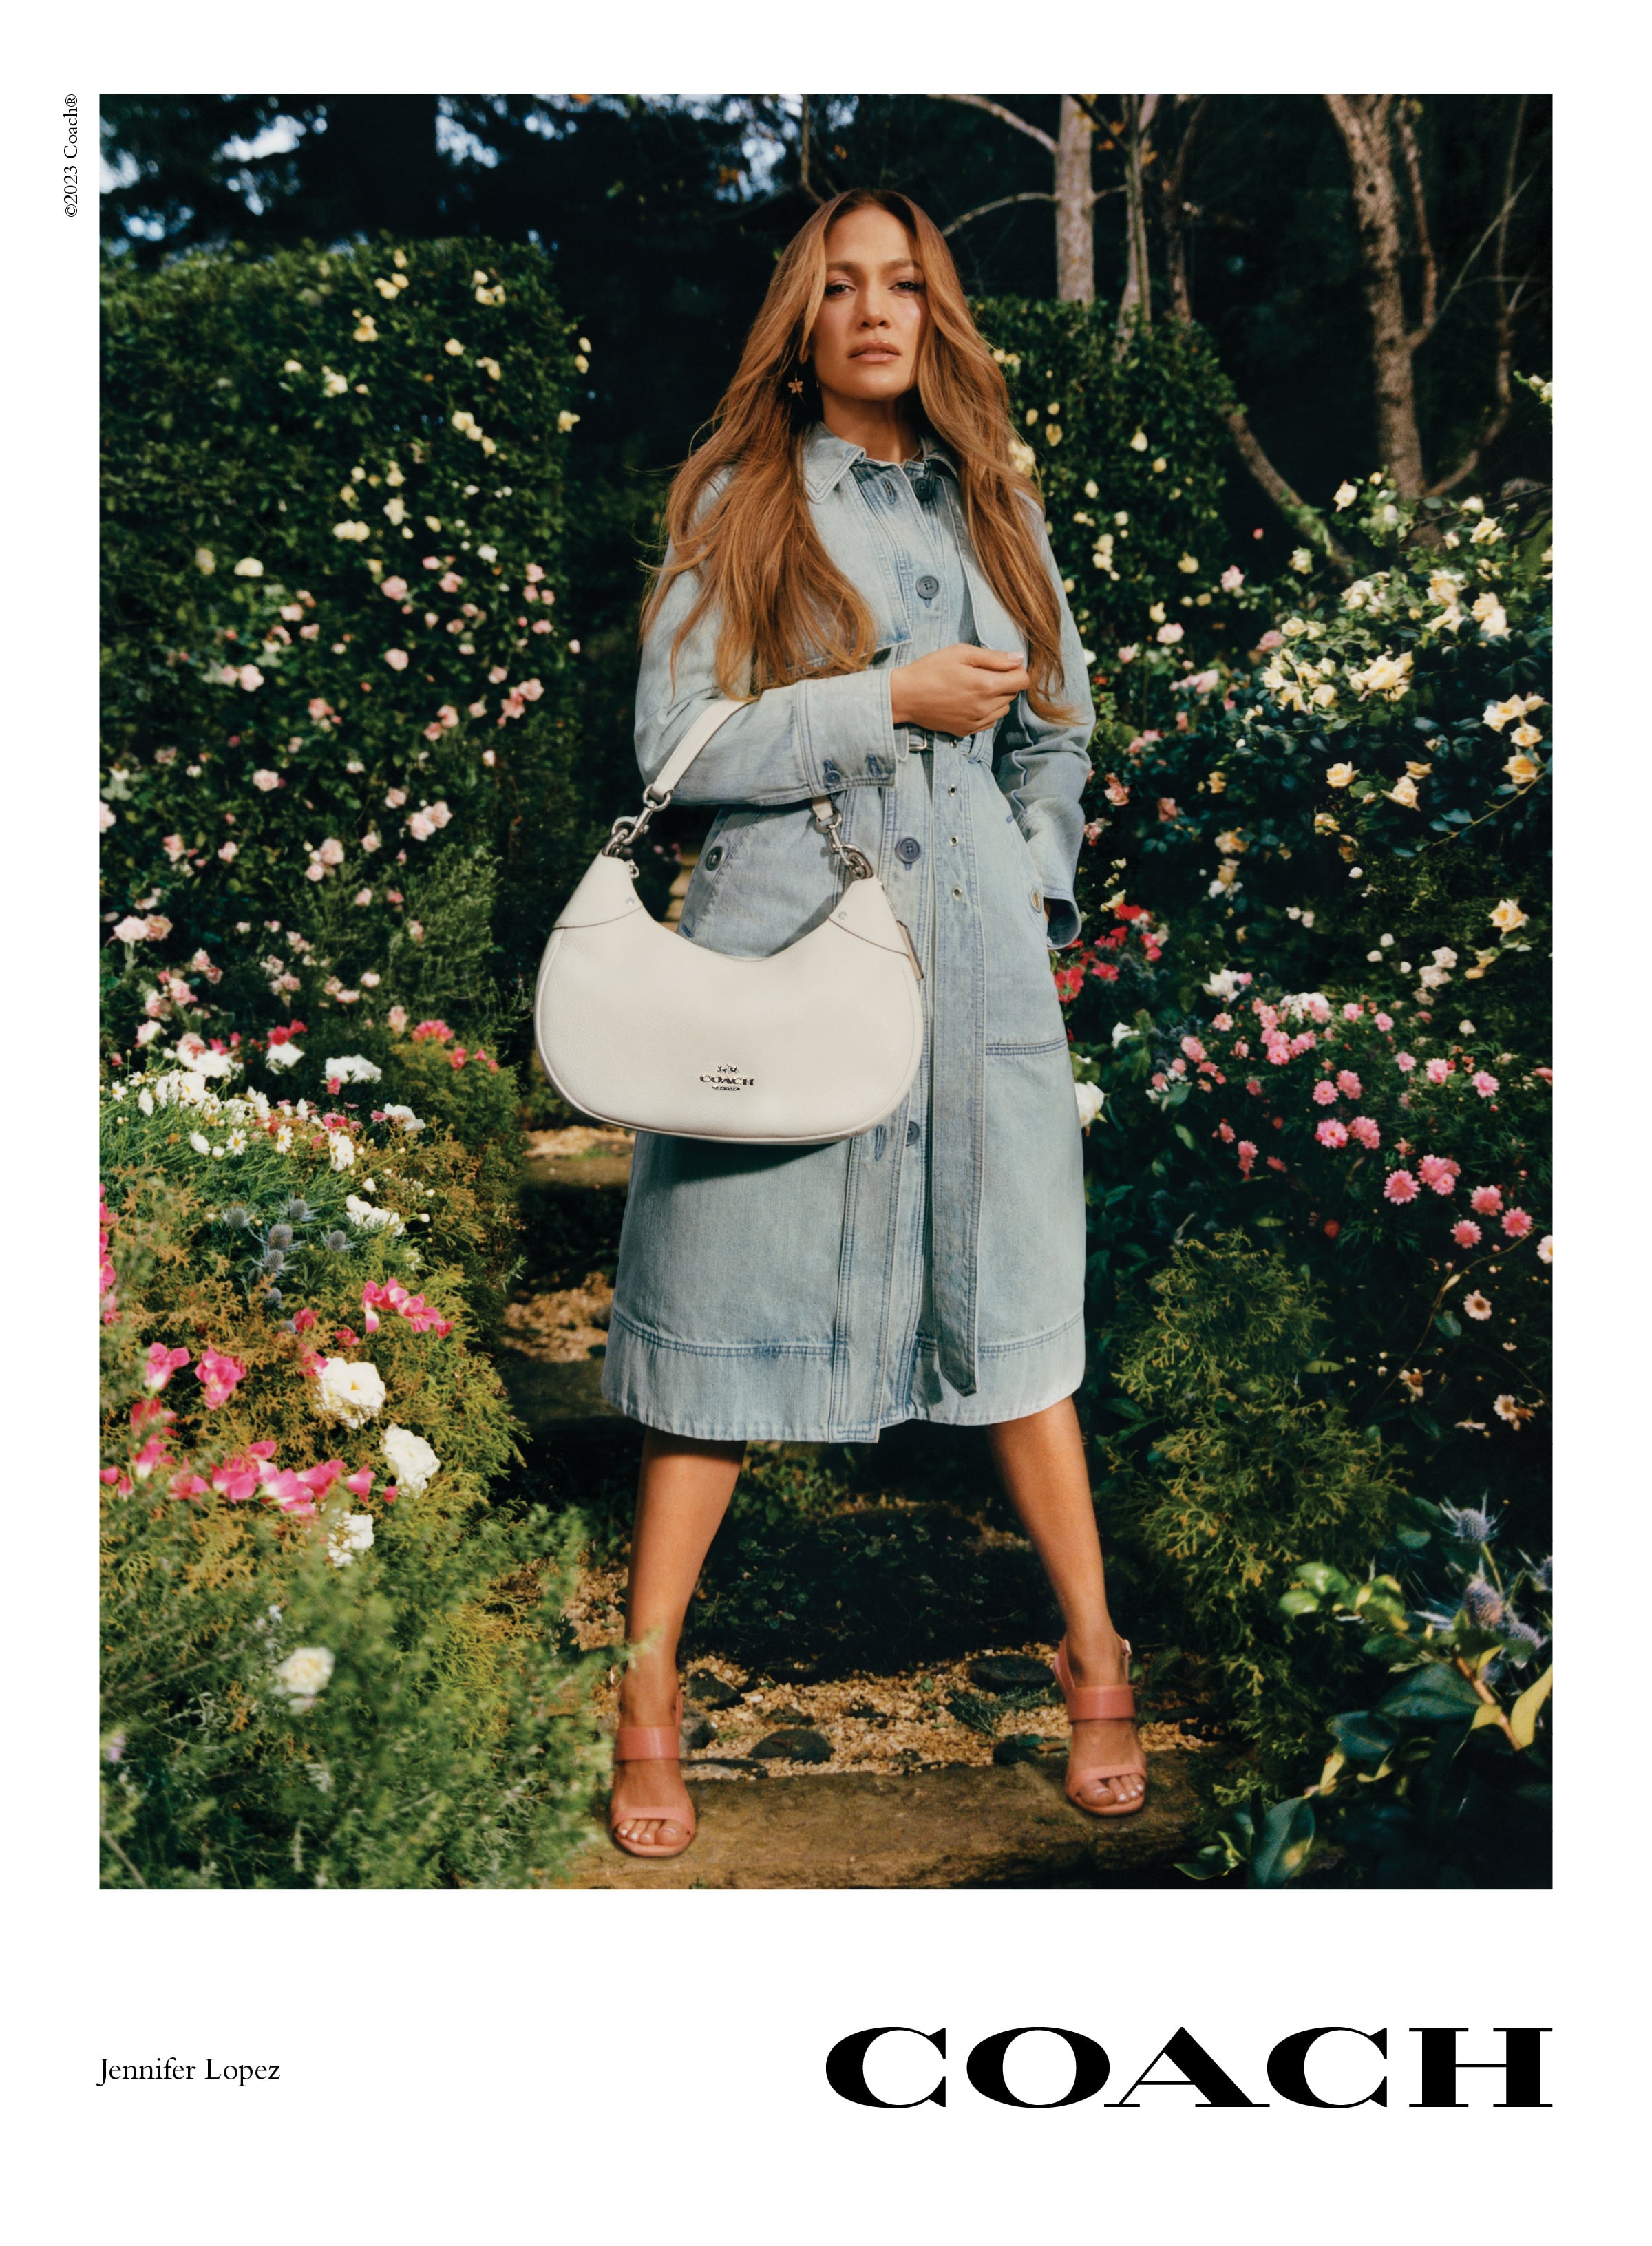 Jennifer Lopez Stars in Coach's Mother's Day Campaign